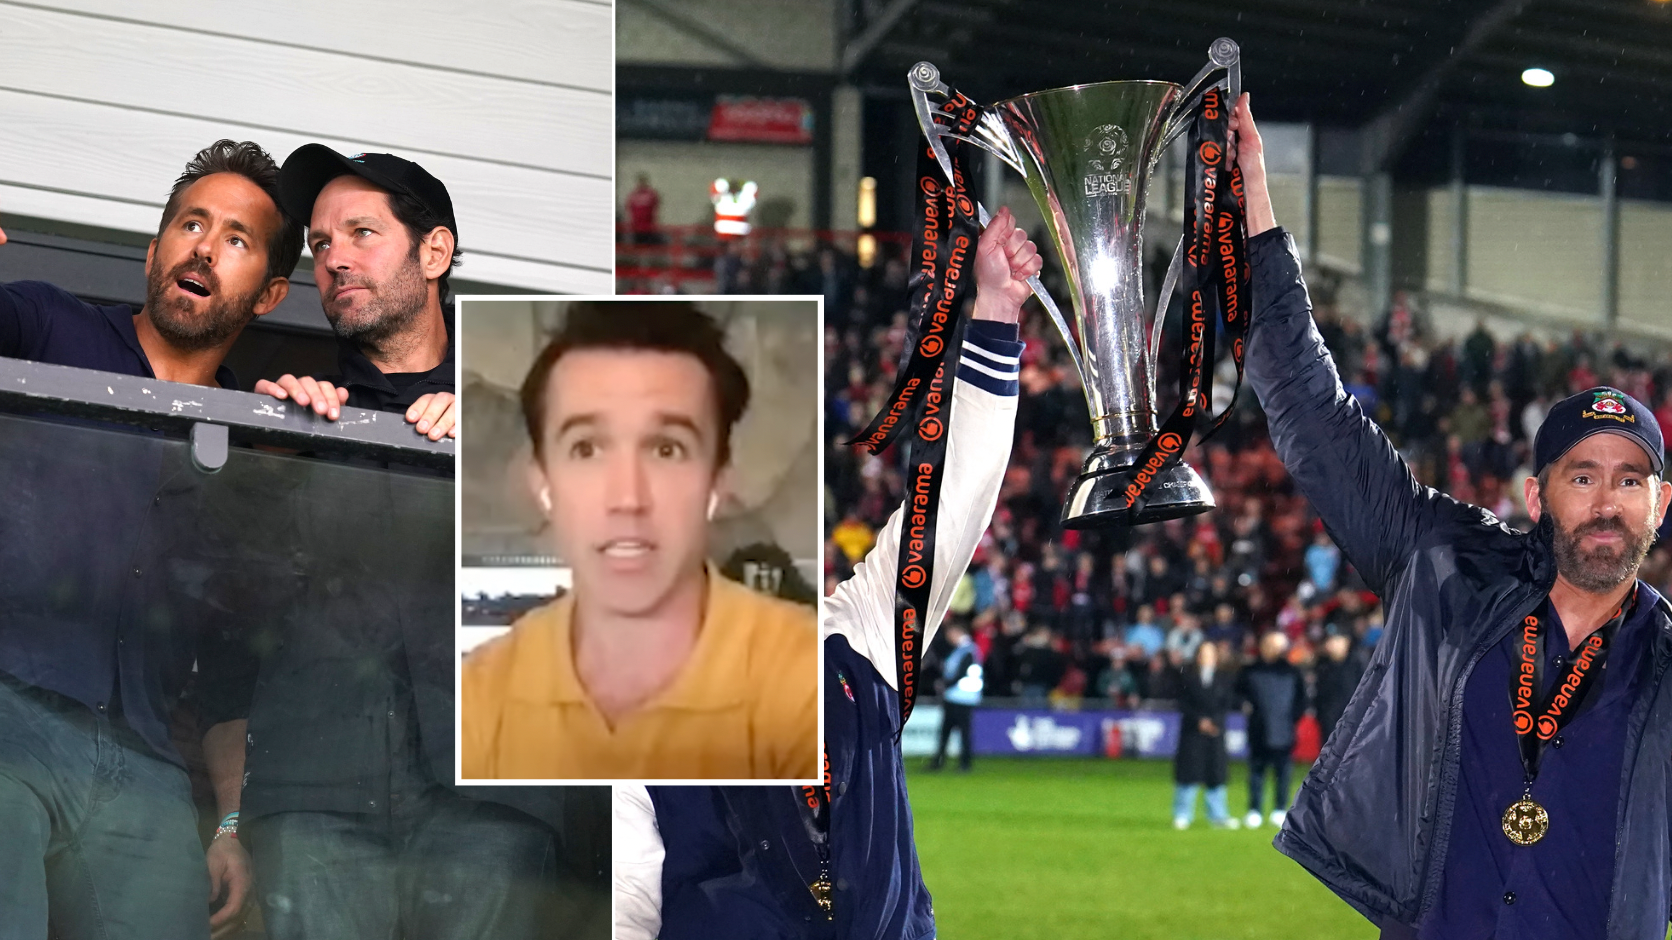 Charlie Day Almost Got Fined For Drinking Beer At Wrexham Game